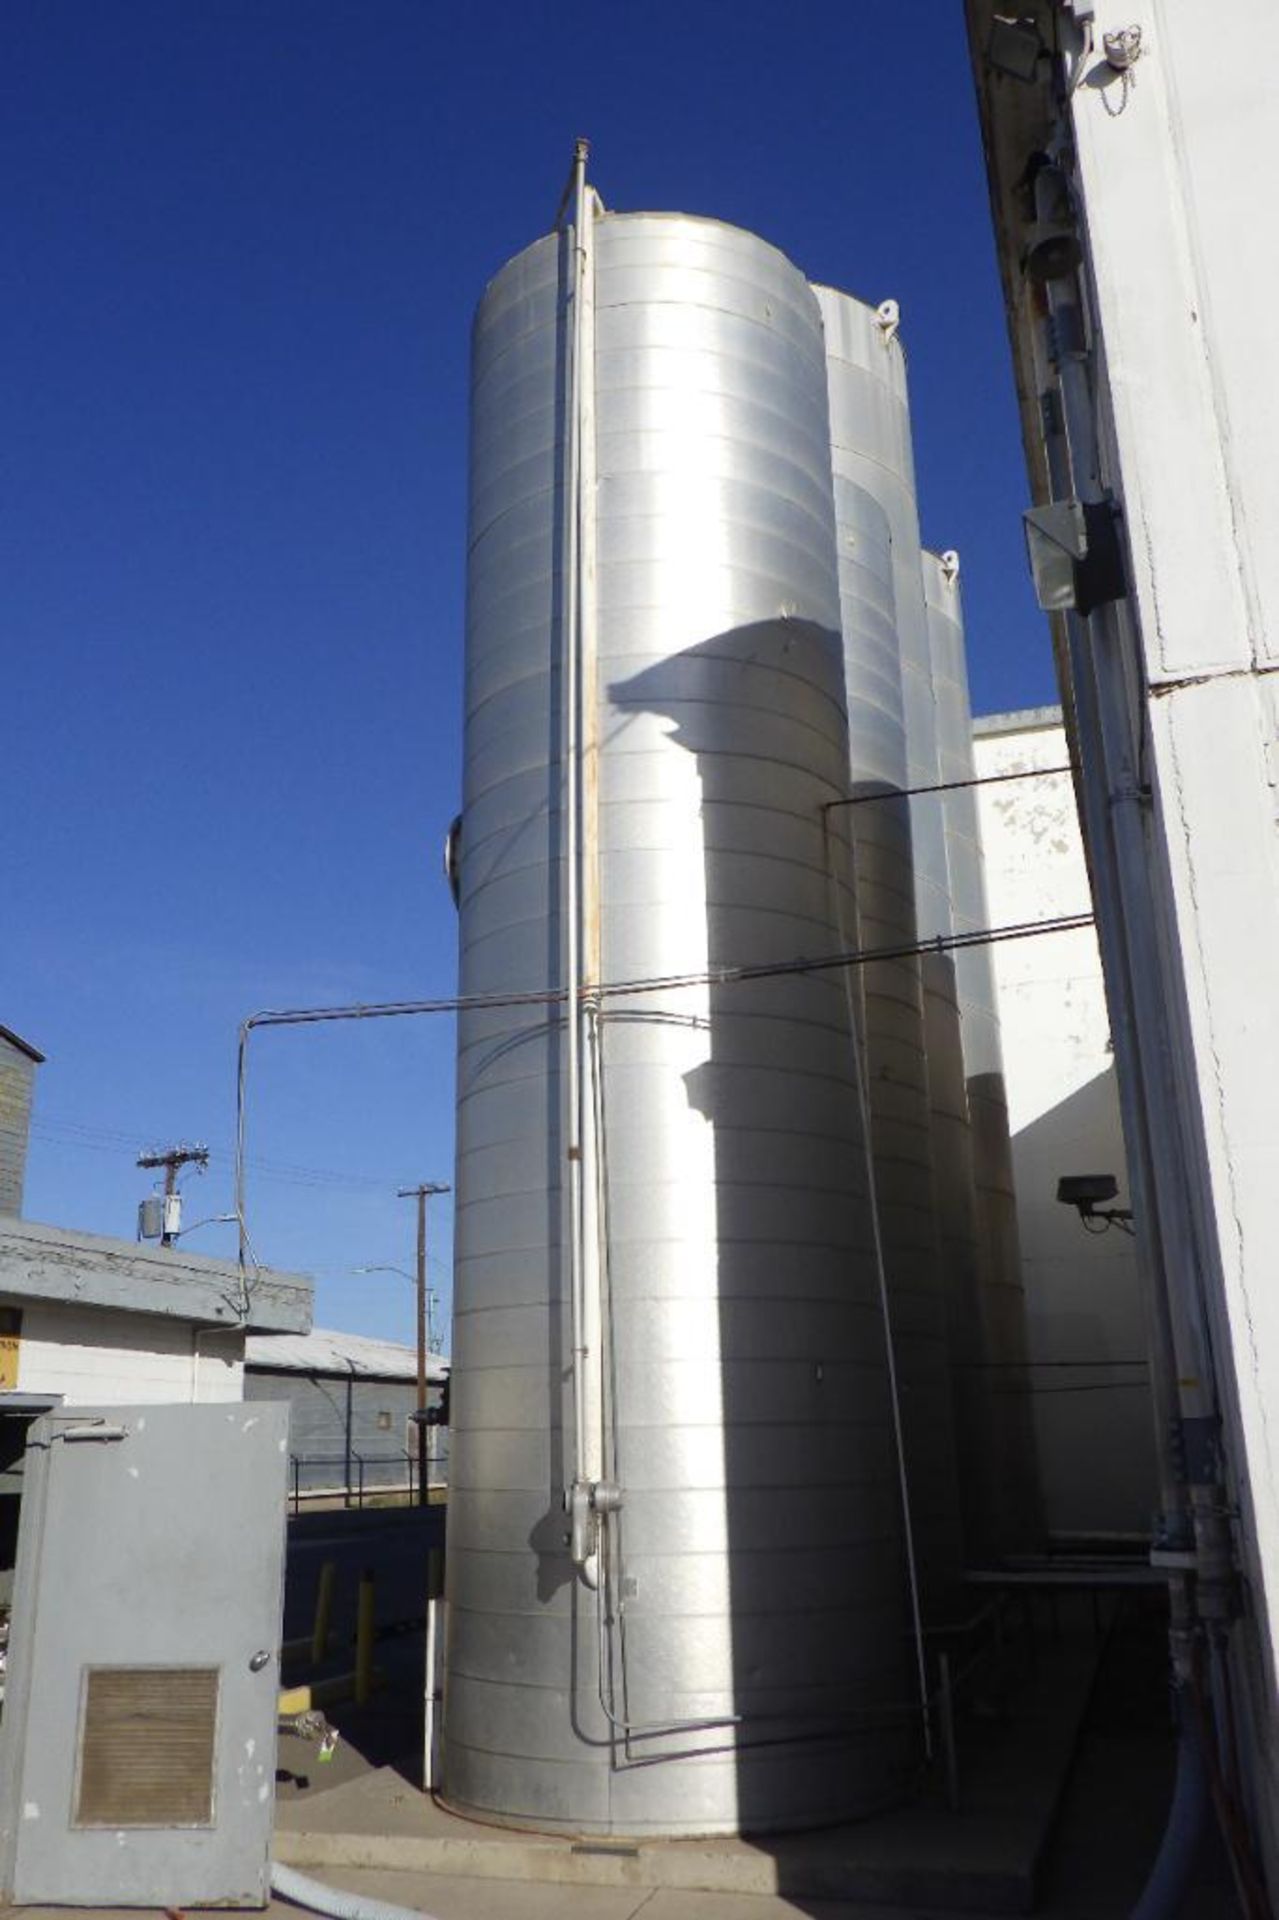 Soy oil tank - Image 12 of 15